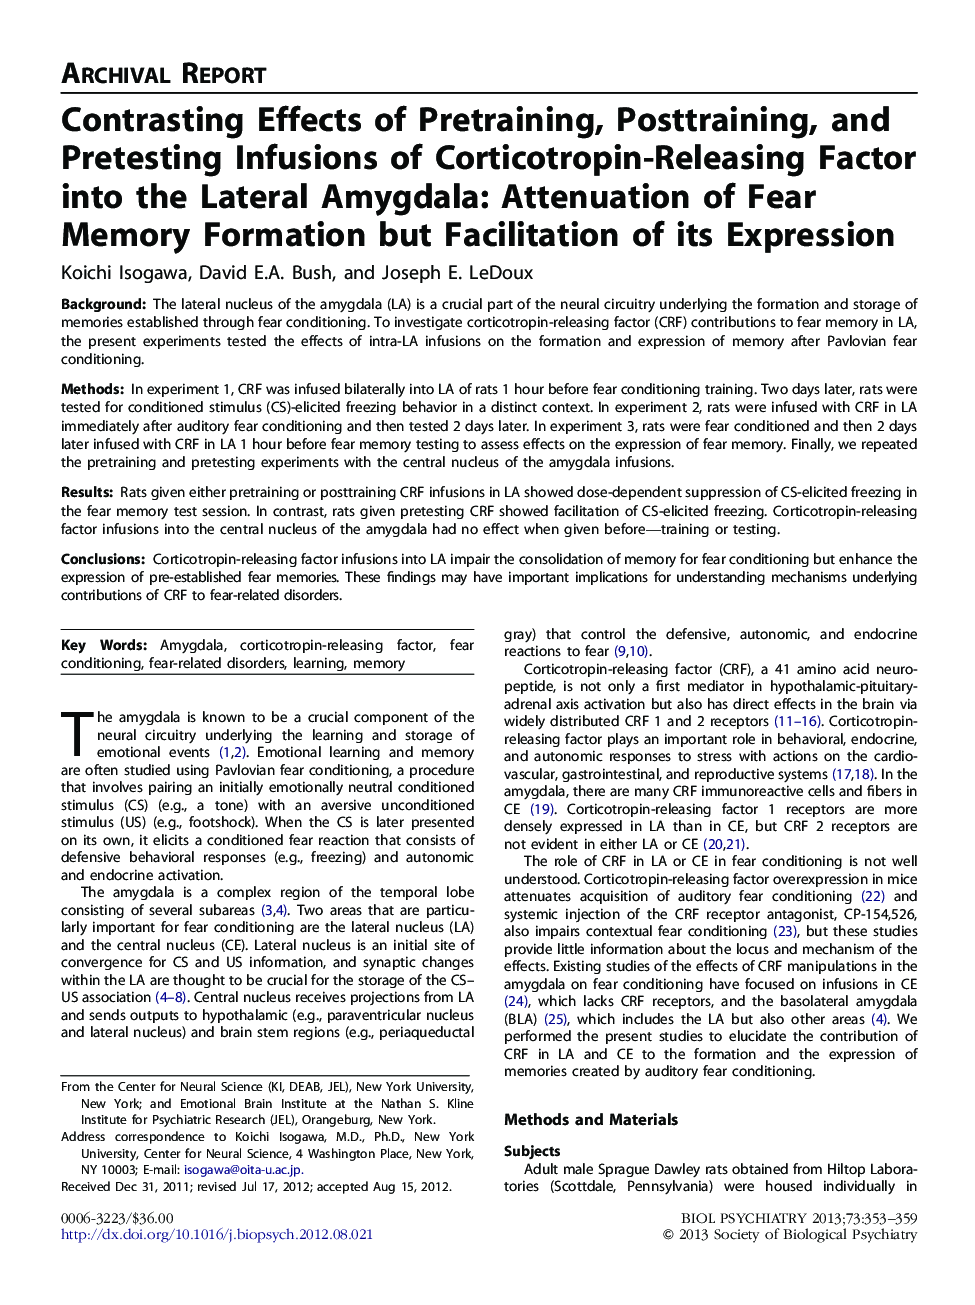 Contrasting Effects of Pretraining, Posttraining, and Pretesting Infusions of Corticotropin-Releasing Factor into the Lateral Amygdala: Attenuation of Fear Memory Formation but Facilitation of its Expression